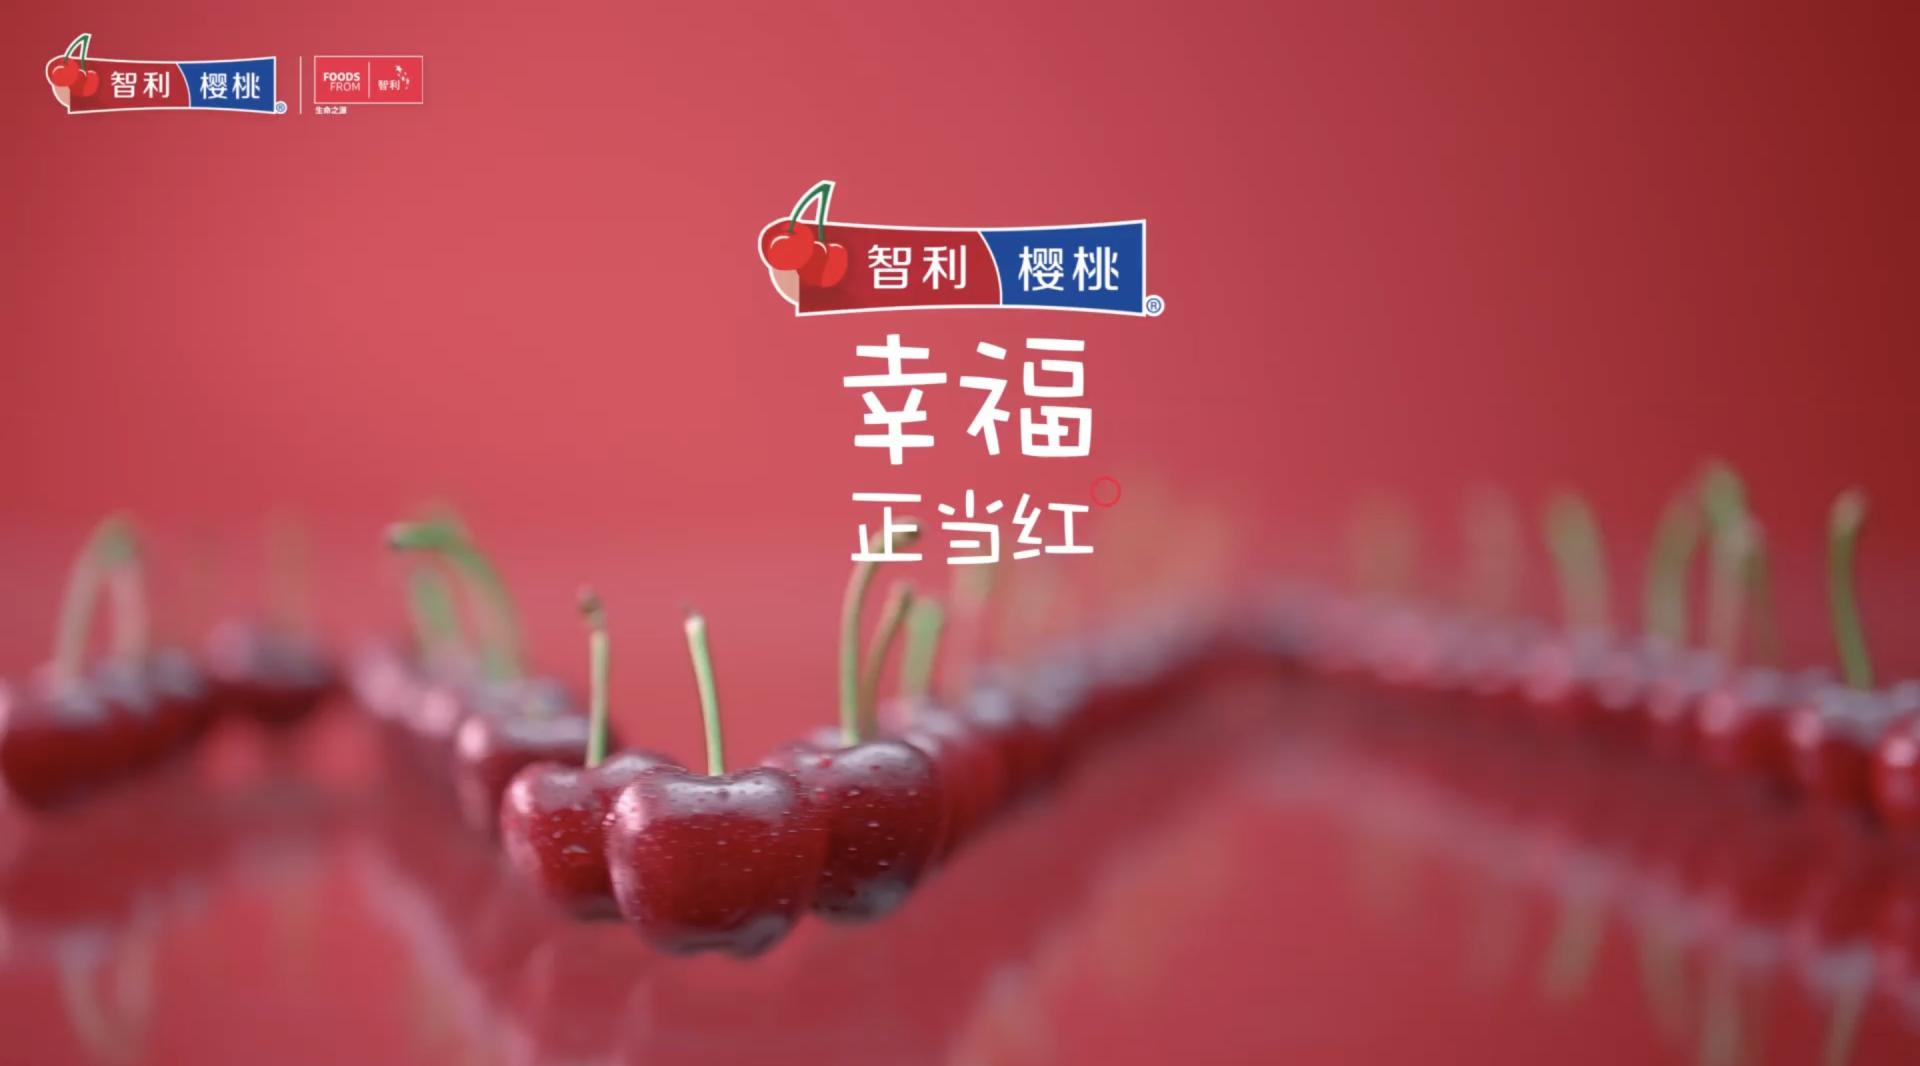 CHERRIES FROM CHILE 2018-2019 CAMPAIGN